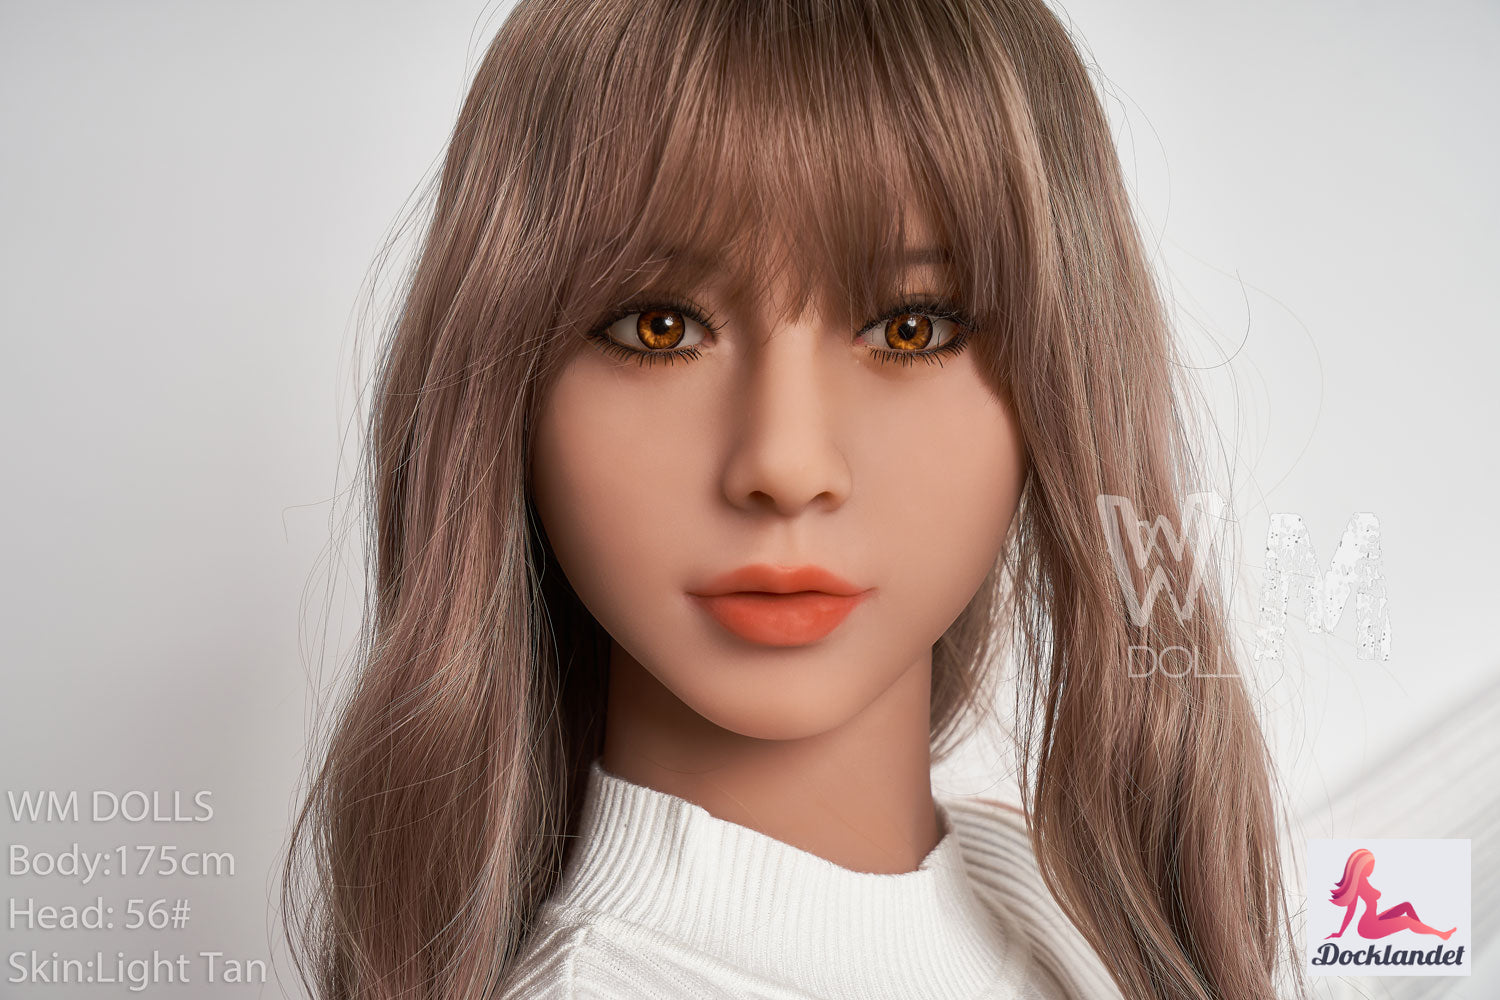 WM-Doll 175 cm G-cup TPE. TPE and Silicone Doll from WM-Doll. Also referred to as Liquid Silicone Rubber (LSR), silicone is a class of polymers made up of repeating units of siloxane. It's rubbery and soft to the touch, which has made silicone a manufacturers' favorite for many years. Moreover, silicone is heat resistant which opens your world to new possibilities. For instance, unlike TPE sex dolls, you can sterilize silicone by boiling, making silicone sex dolls easier to clean and maintain. Sex dolls made of silicone are more durable, easier to clean and the dolls can be made to look extremely realistic.